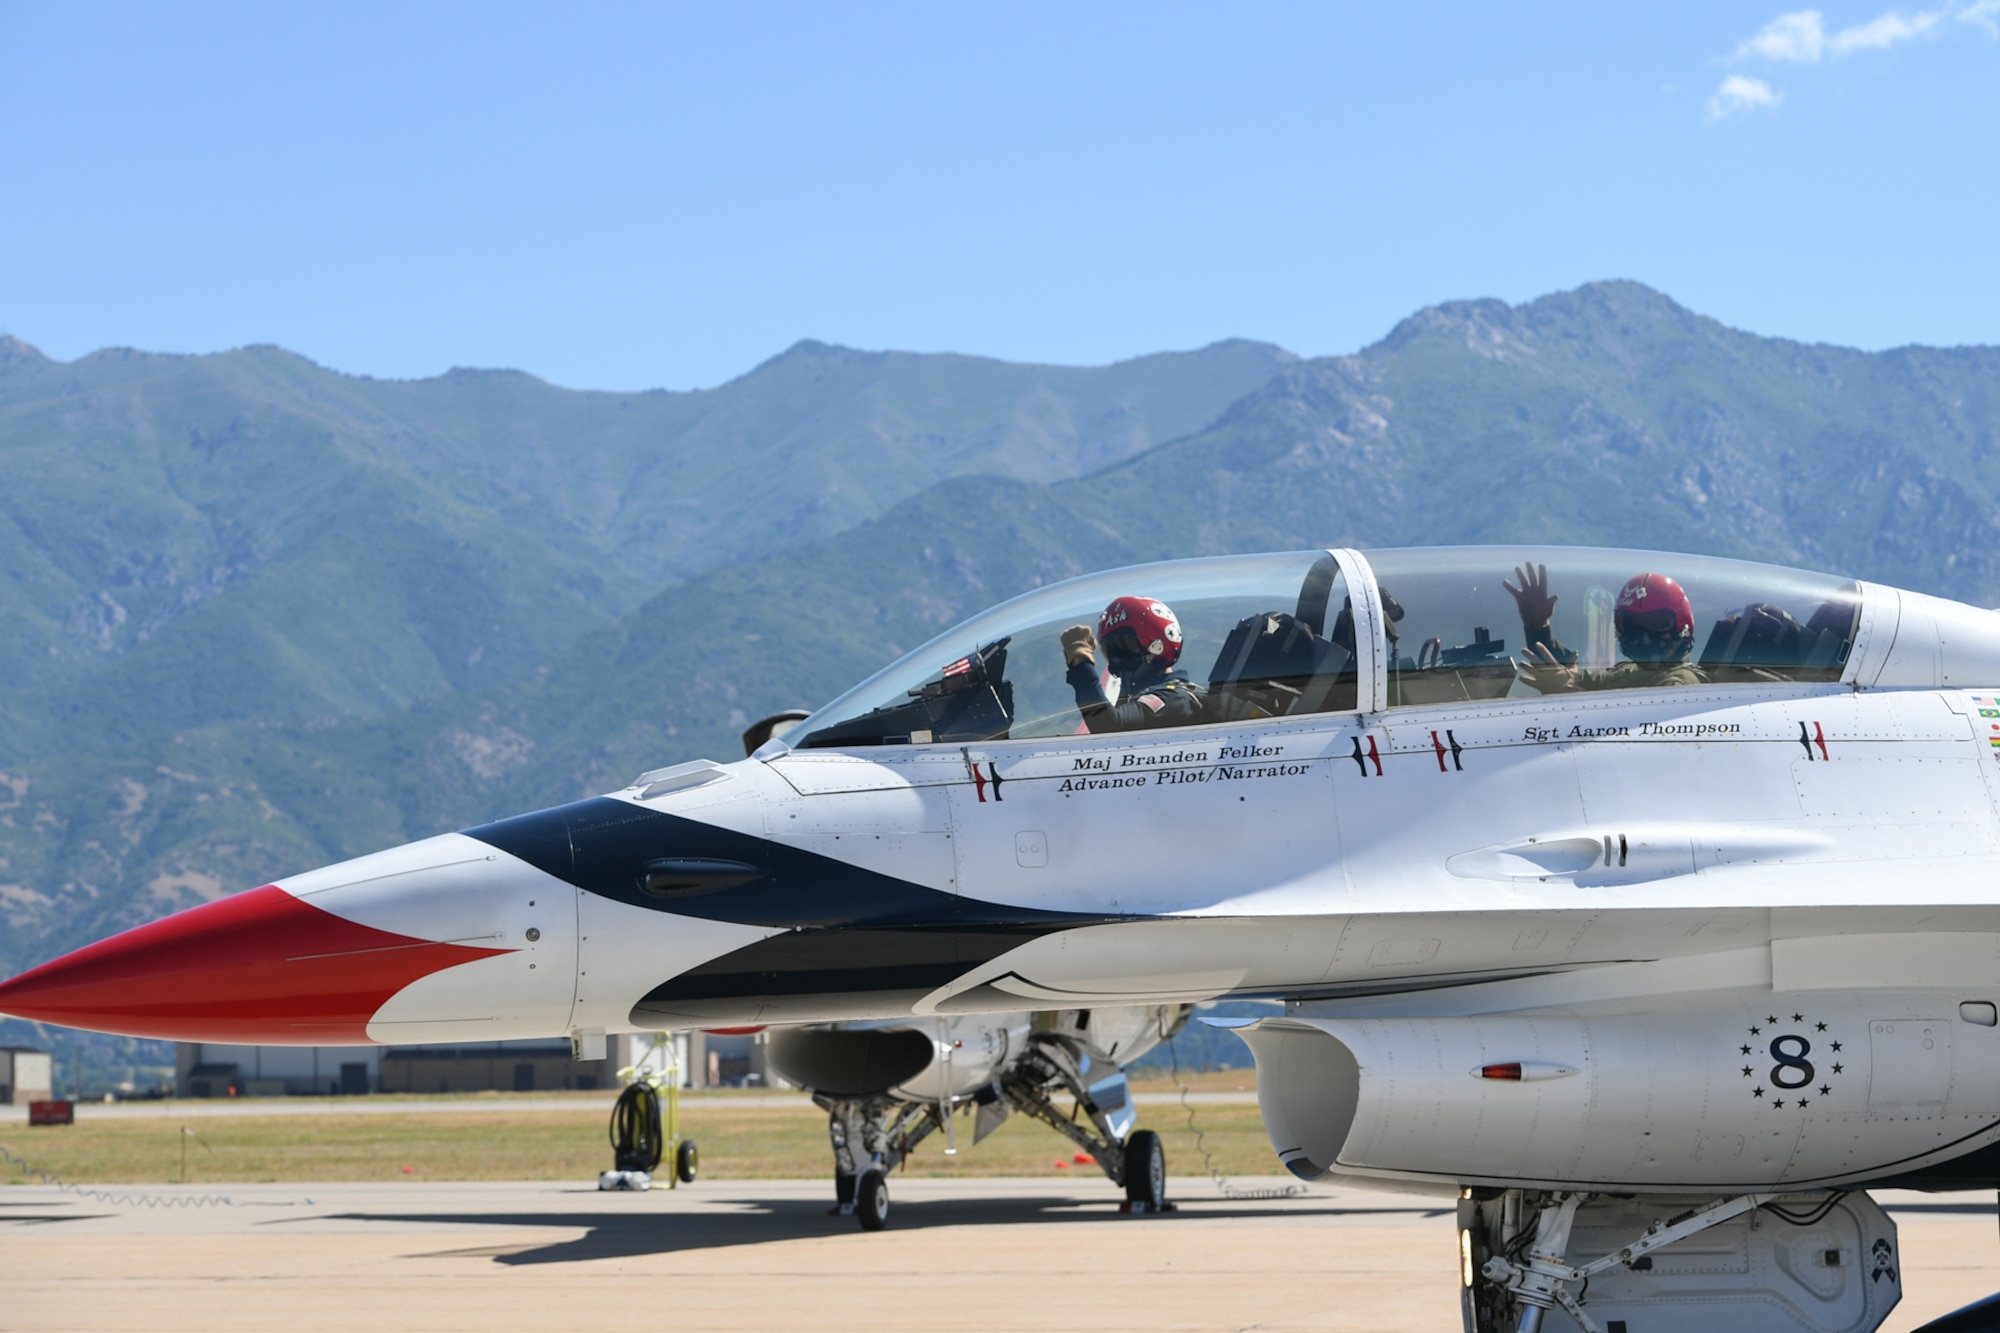 Sergeant Aaron Thompson, Utah Washington County Sheriff, waves at his family and friends before flying with the U.S. Air Force Thunderbirds June 22, 2018, at Hill Air Force Base, Utah. Thompson was selected to fly with the Thunderbirds as part of their Hometown Hero program. (U.S. Air Force photo by Cynthia Griggs)